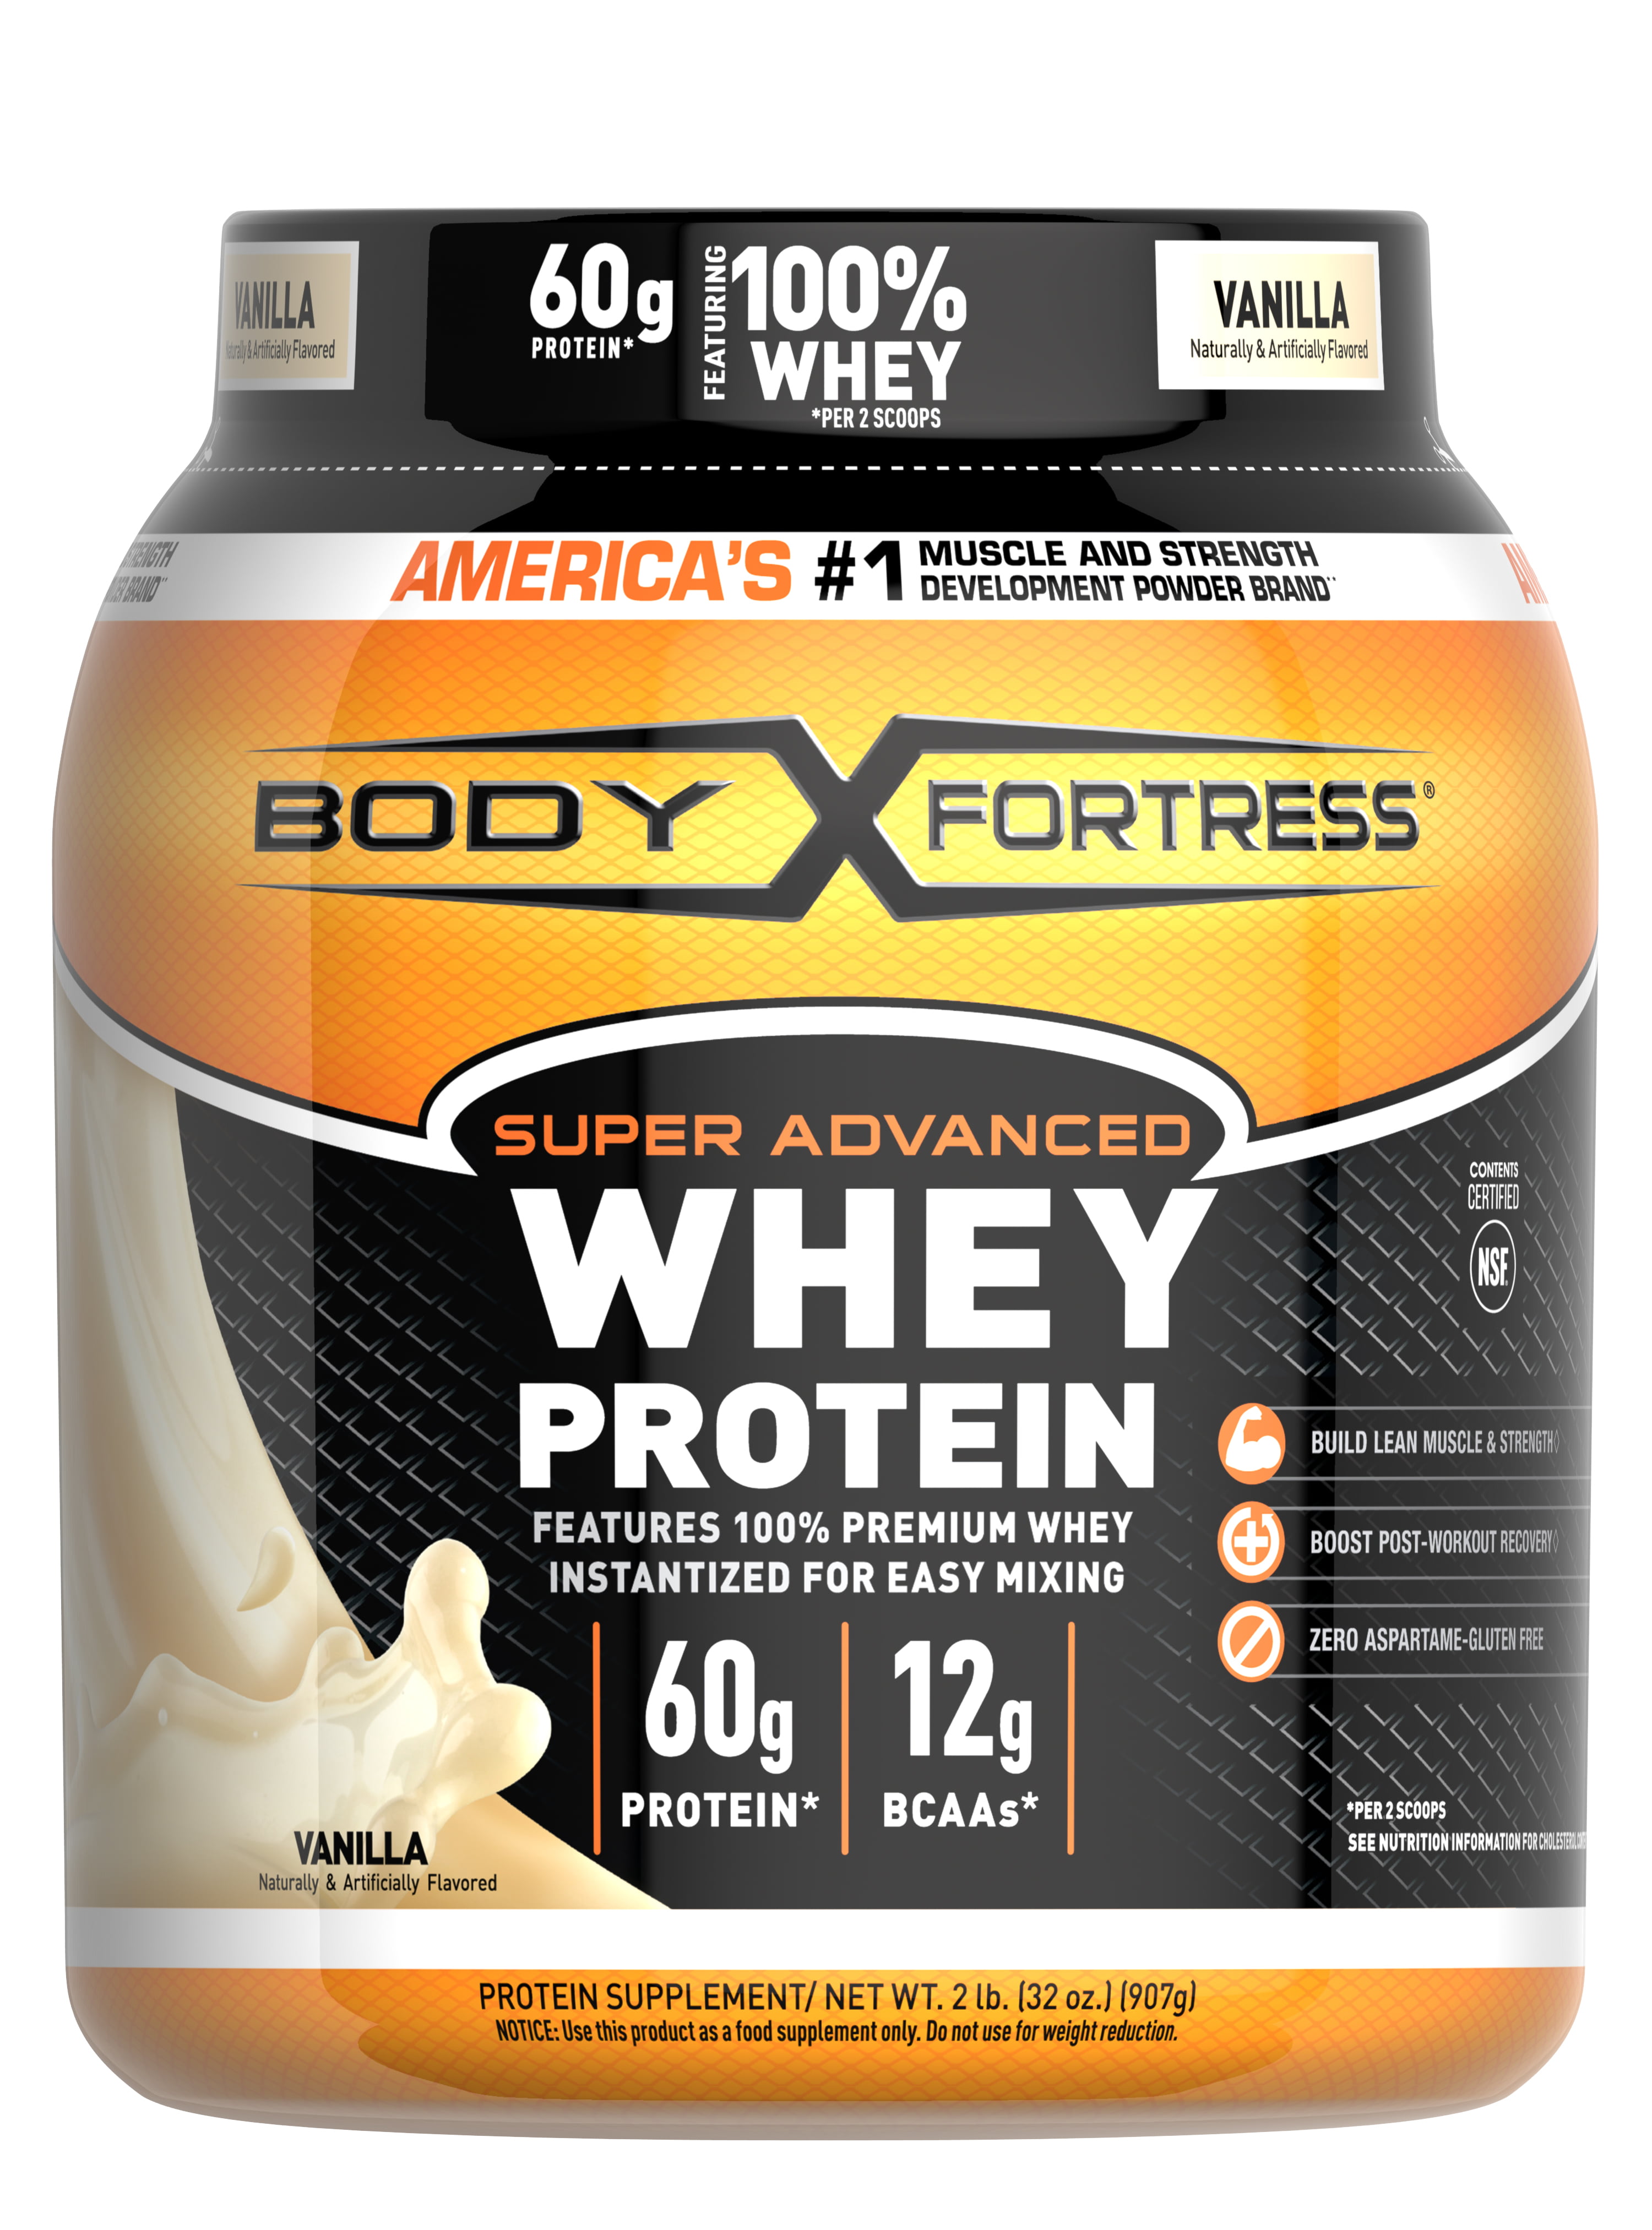 Heerlijk Centimeter half acht Body Fortress Super Advanced Whey Protein, Vanilla, Protein Supplement  Powder to Build Lean Muscle & Strength*, 2lb Jar (Packaging May Vary) -  Walmart.com